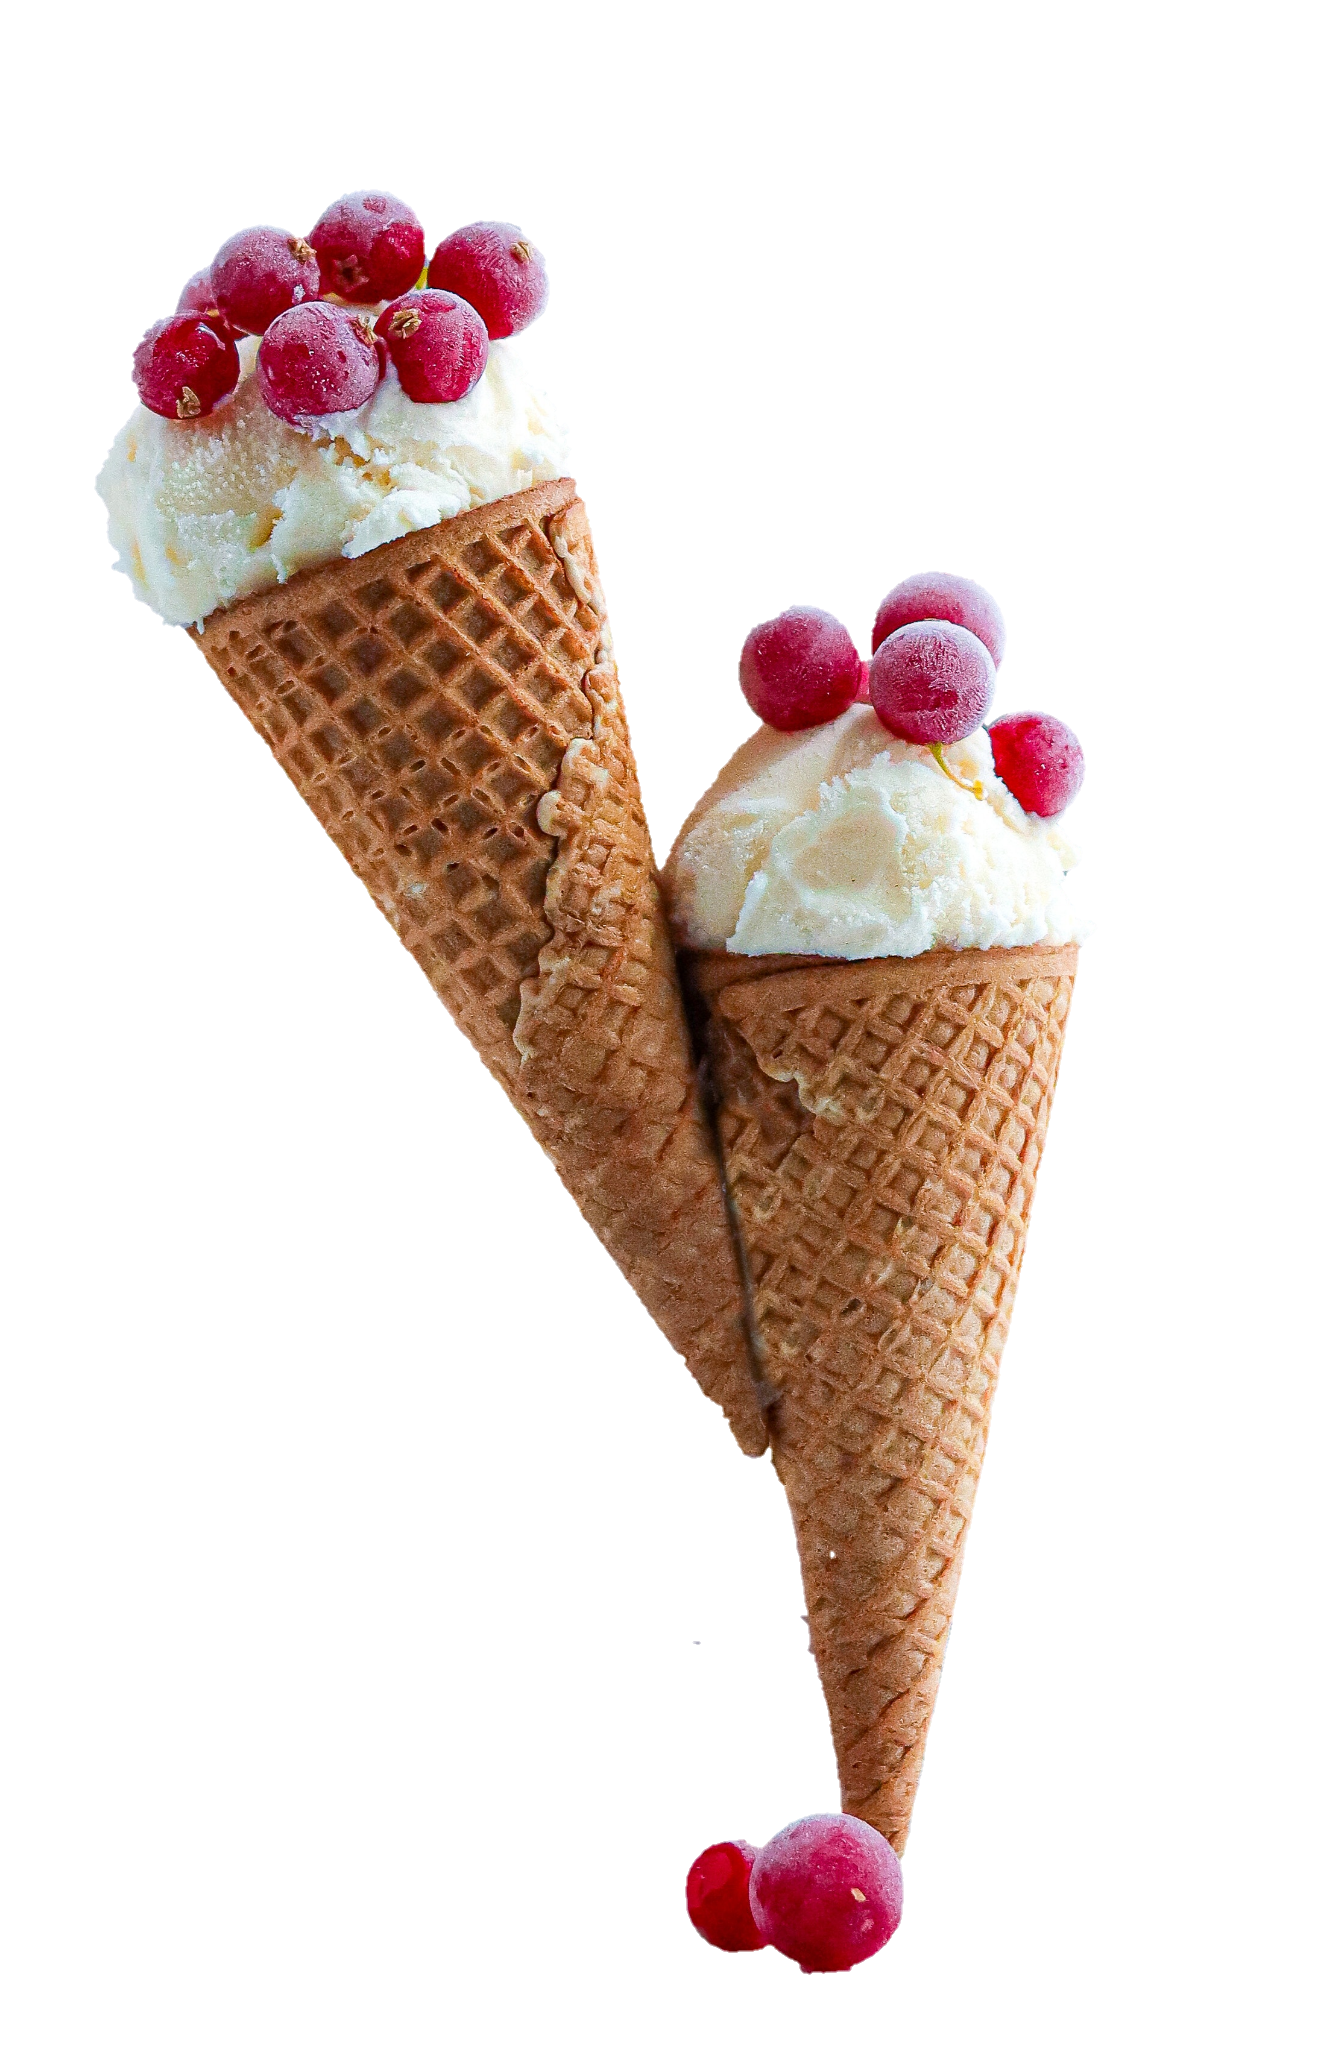 ice-cream-png-image-from-pngfre-4